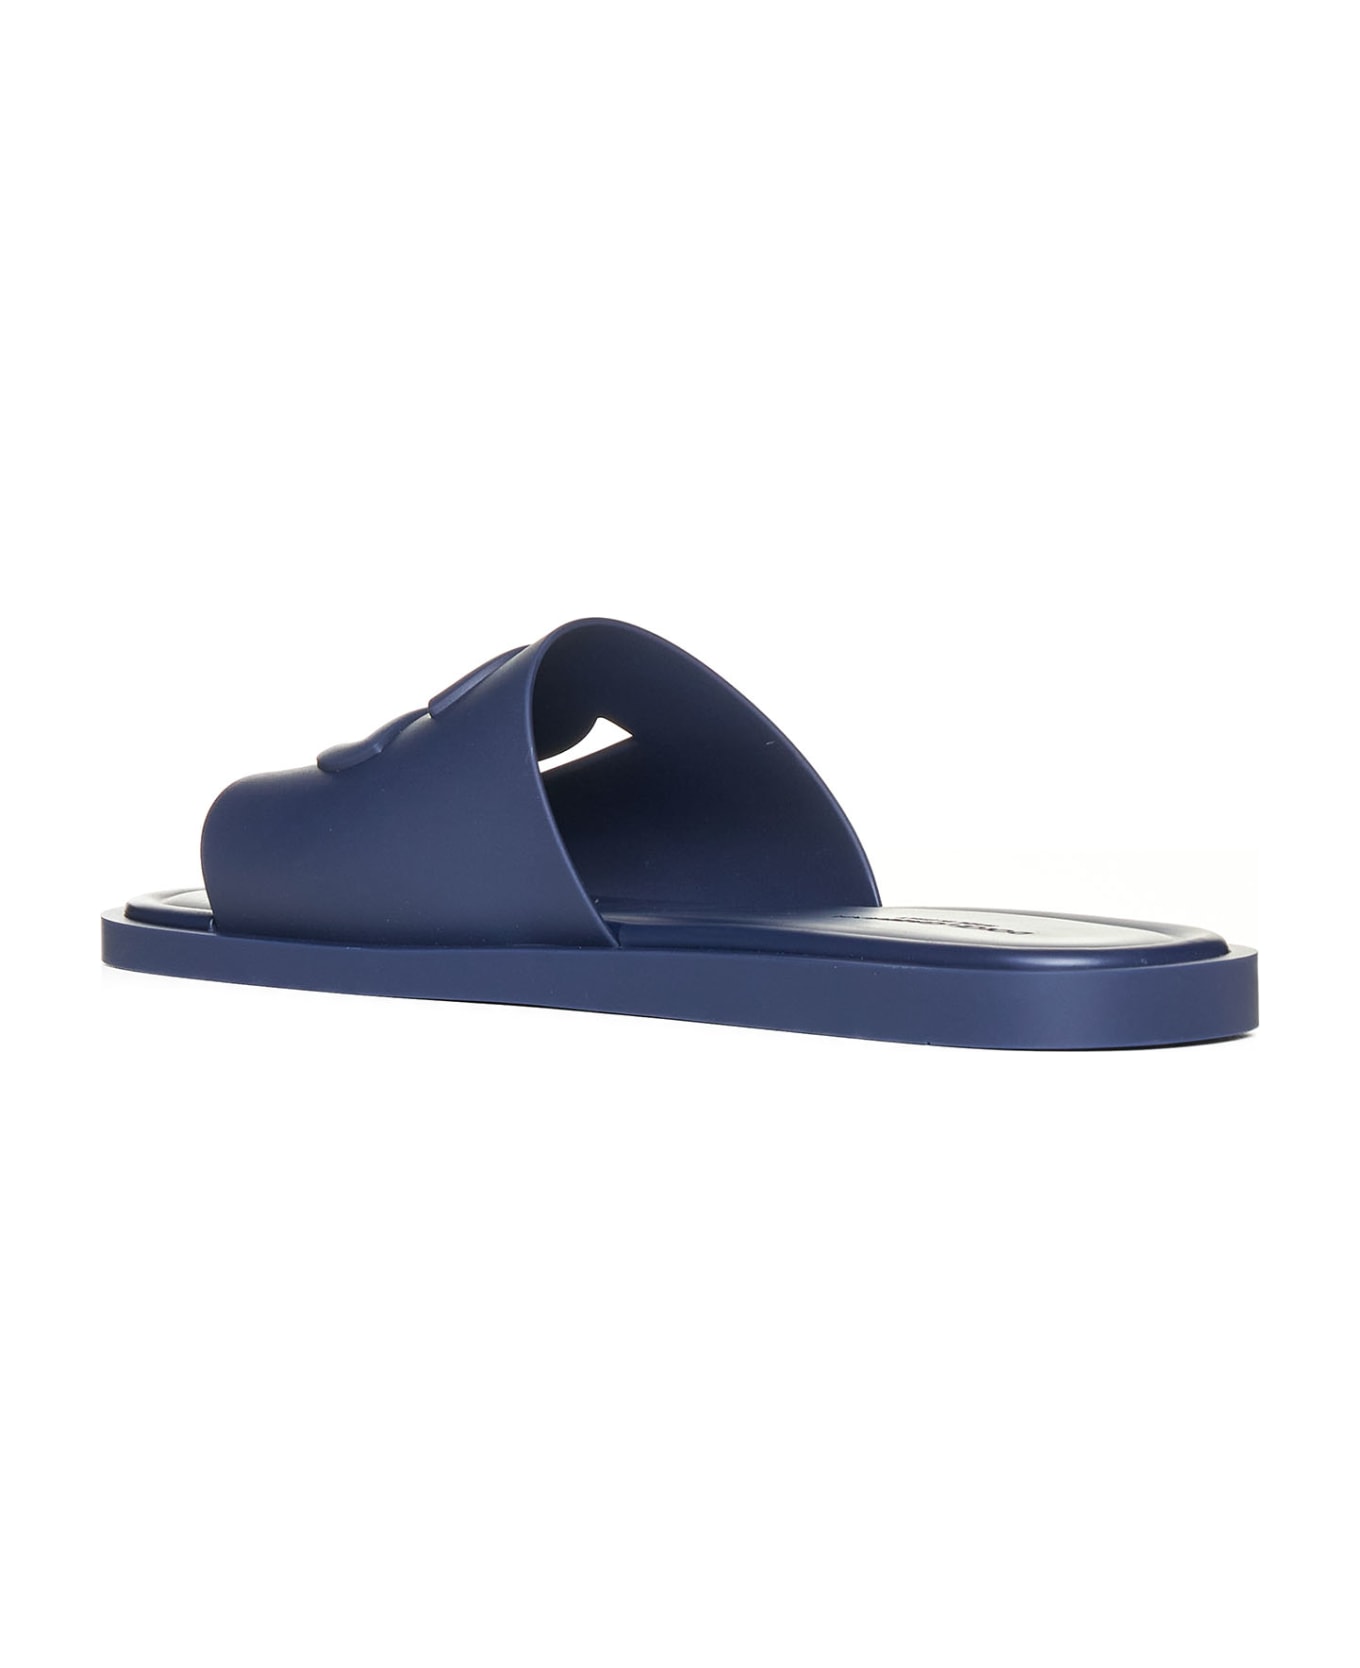 Dolce & Gabbana Sandal With Logo - blue その他各種シューズ